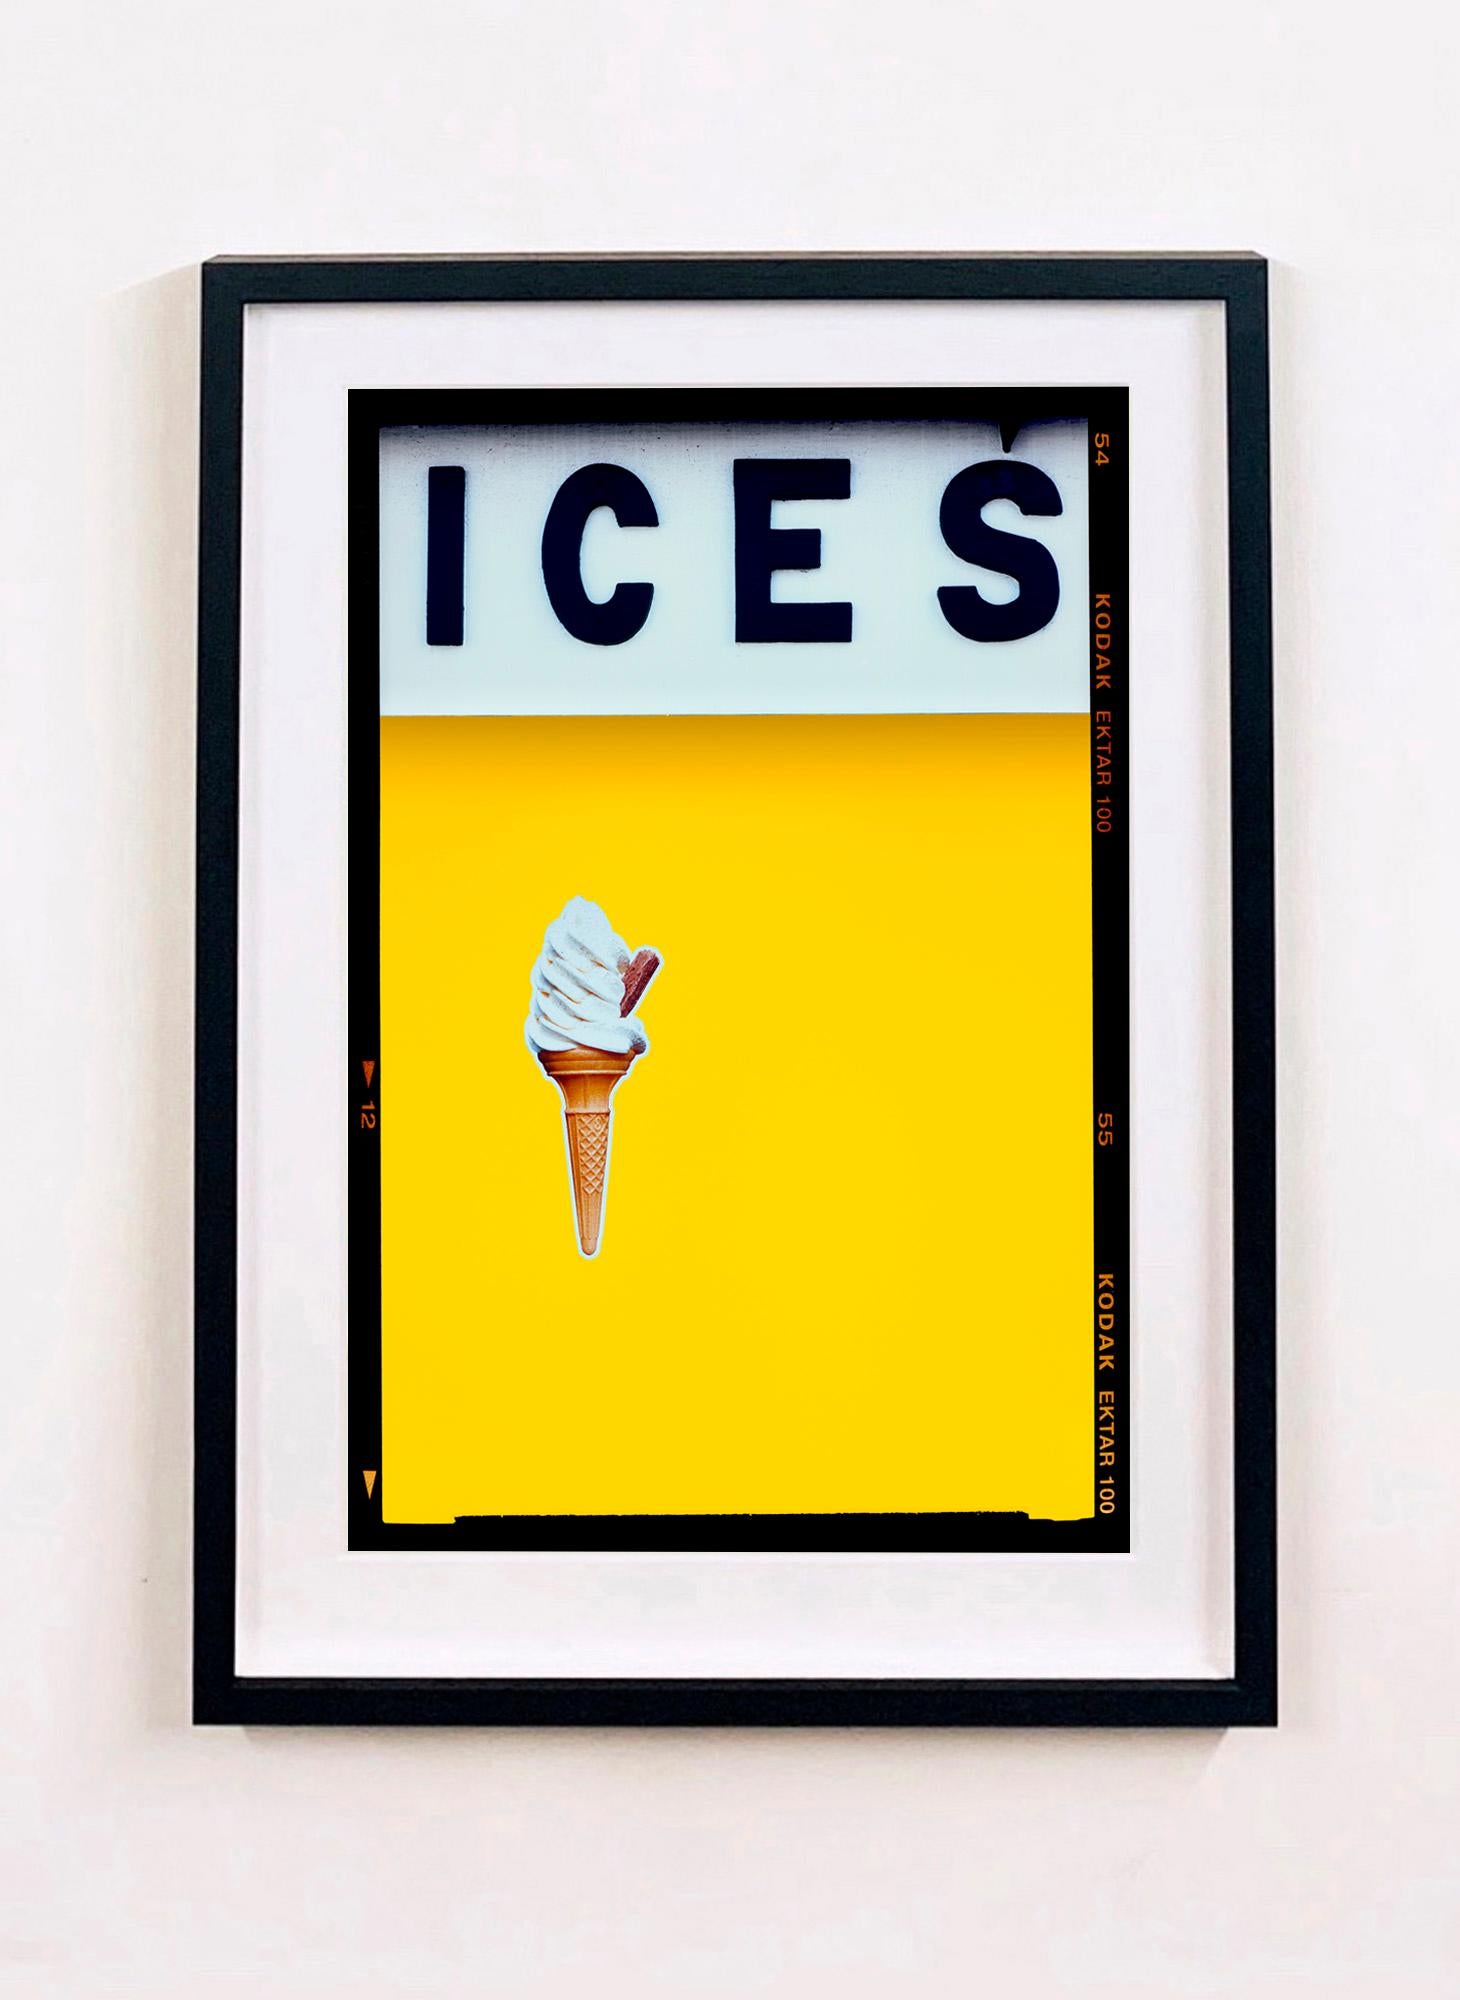 Ices (Yellow), Bexhill-on-Sea - British seaside color photography - Photograph by Richard Heeps